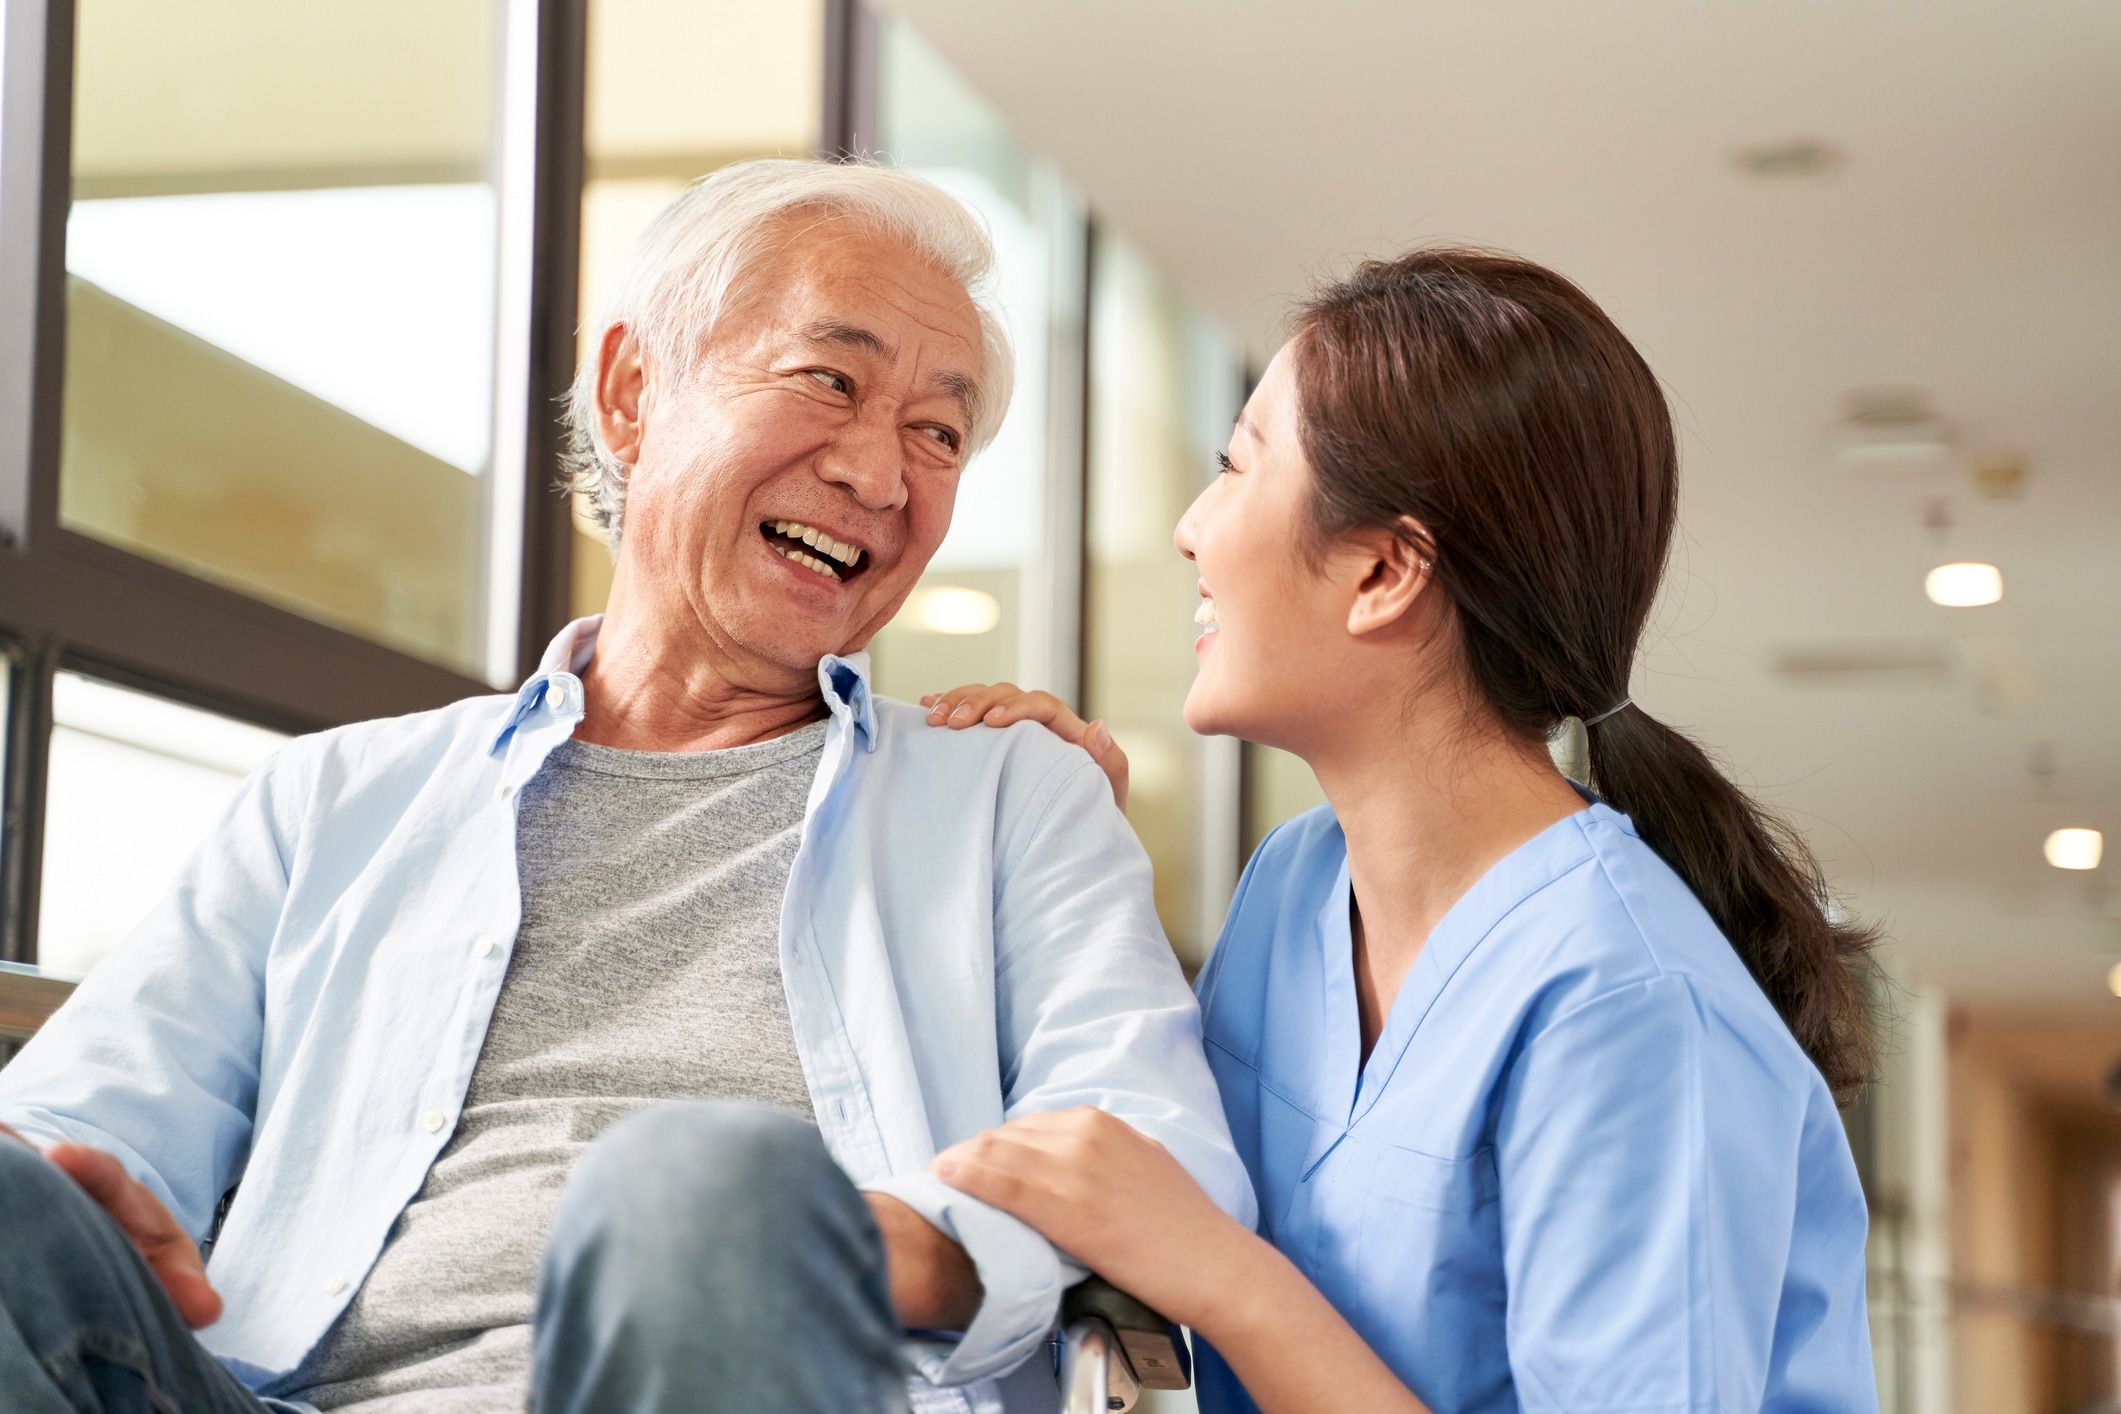 home health aide new jersey
new jersey elderly care
gloucester home care services
senior care gloucester county nj
new jersey home care agencies